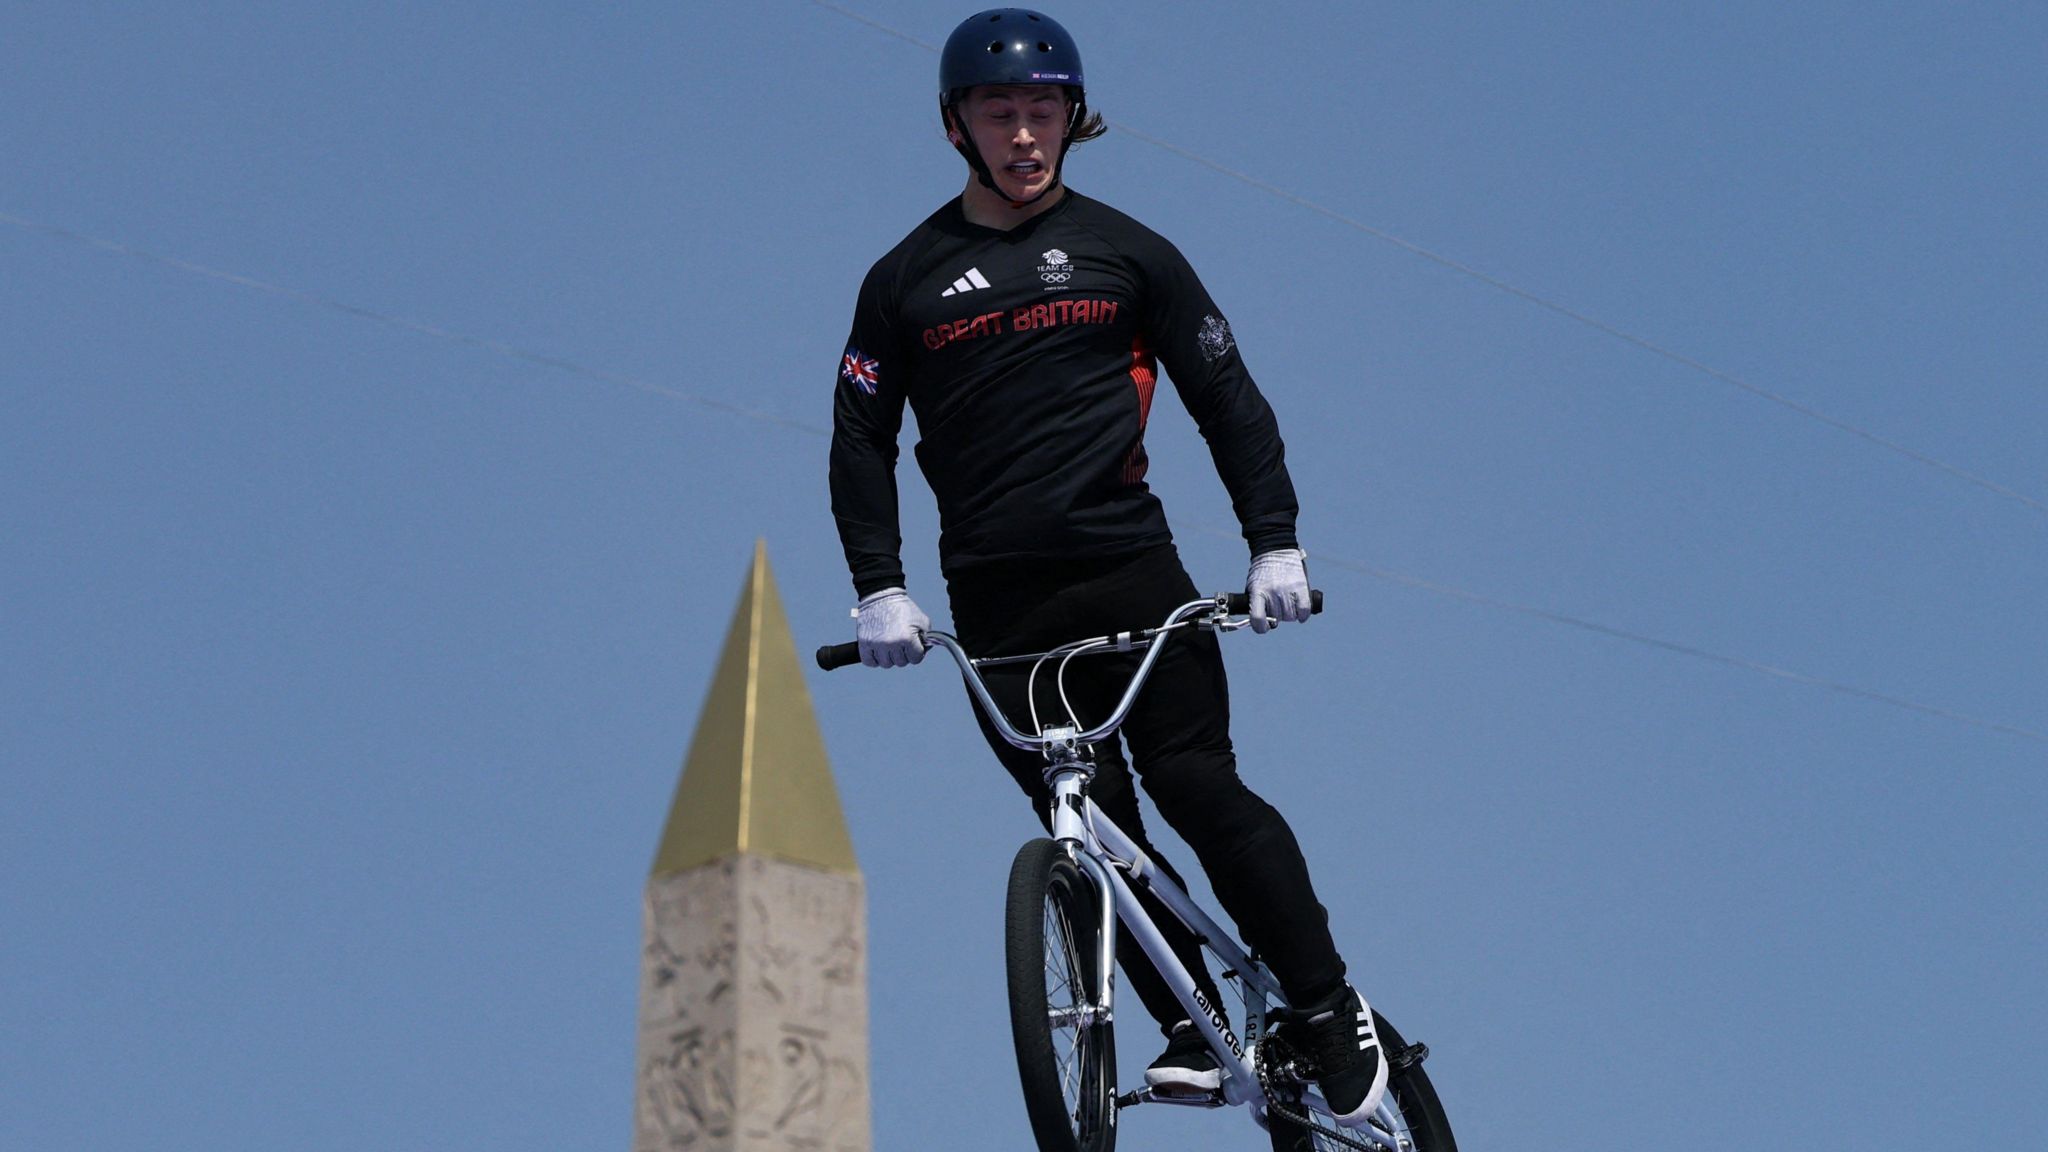 Kieran Reilly competes at the Paris Olympics